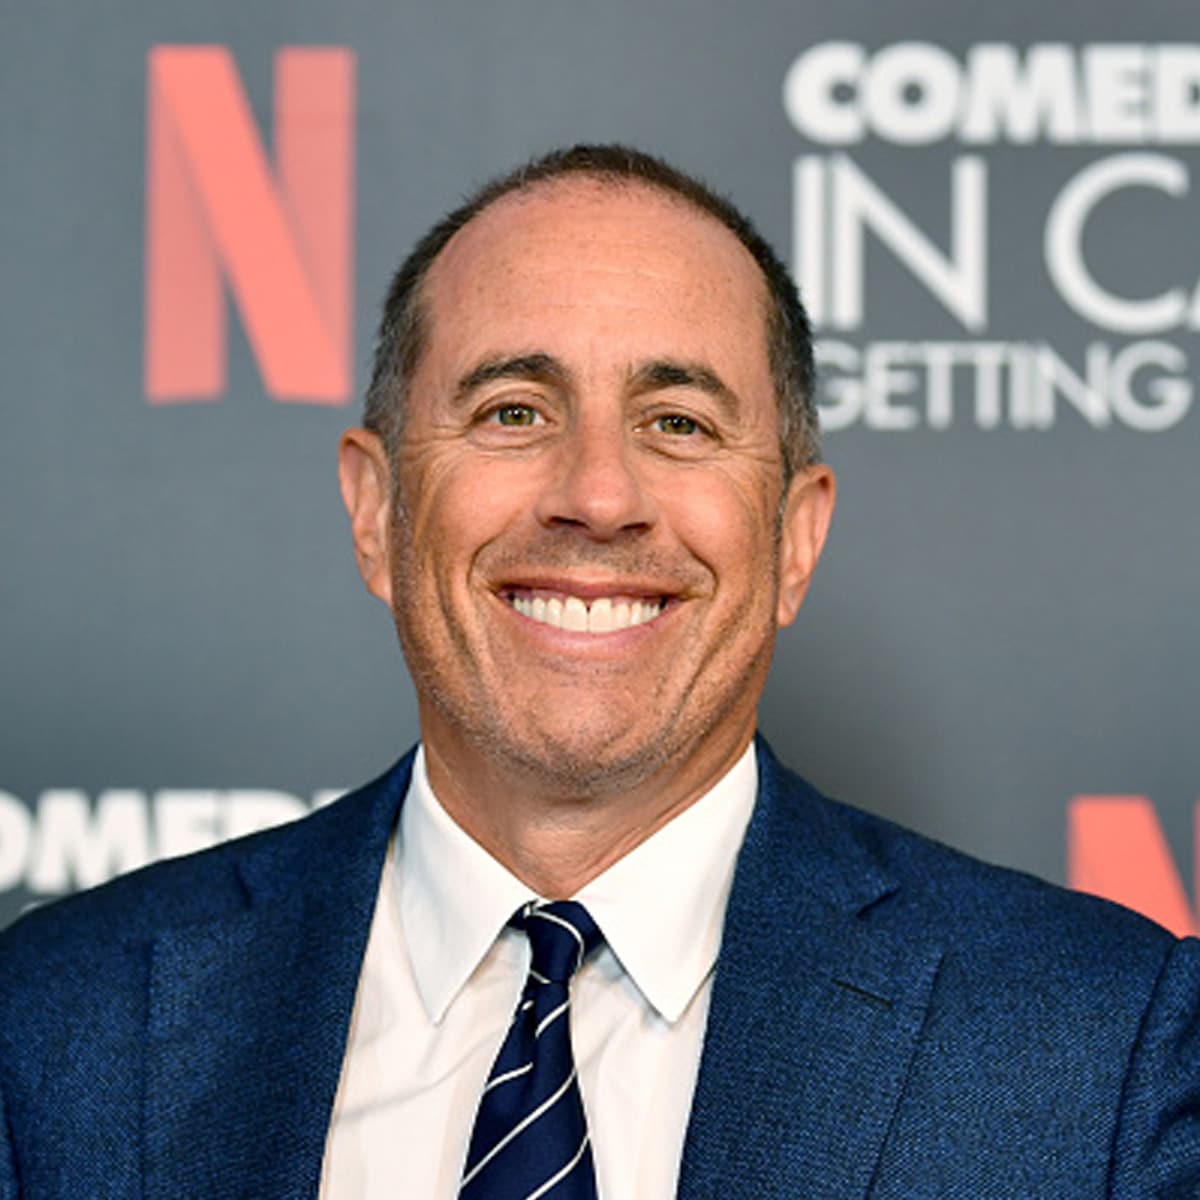 actor jerry seinfeld attends the la tastemaker event for comedians in cars